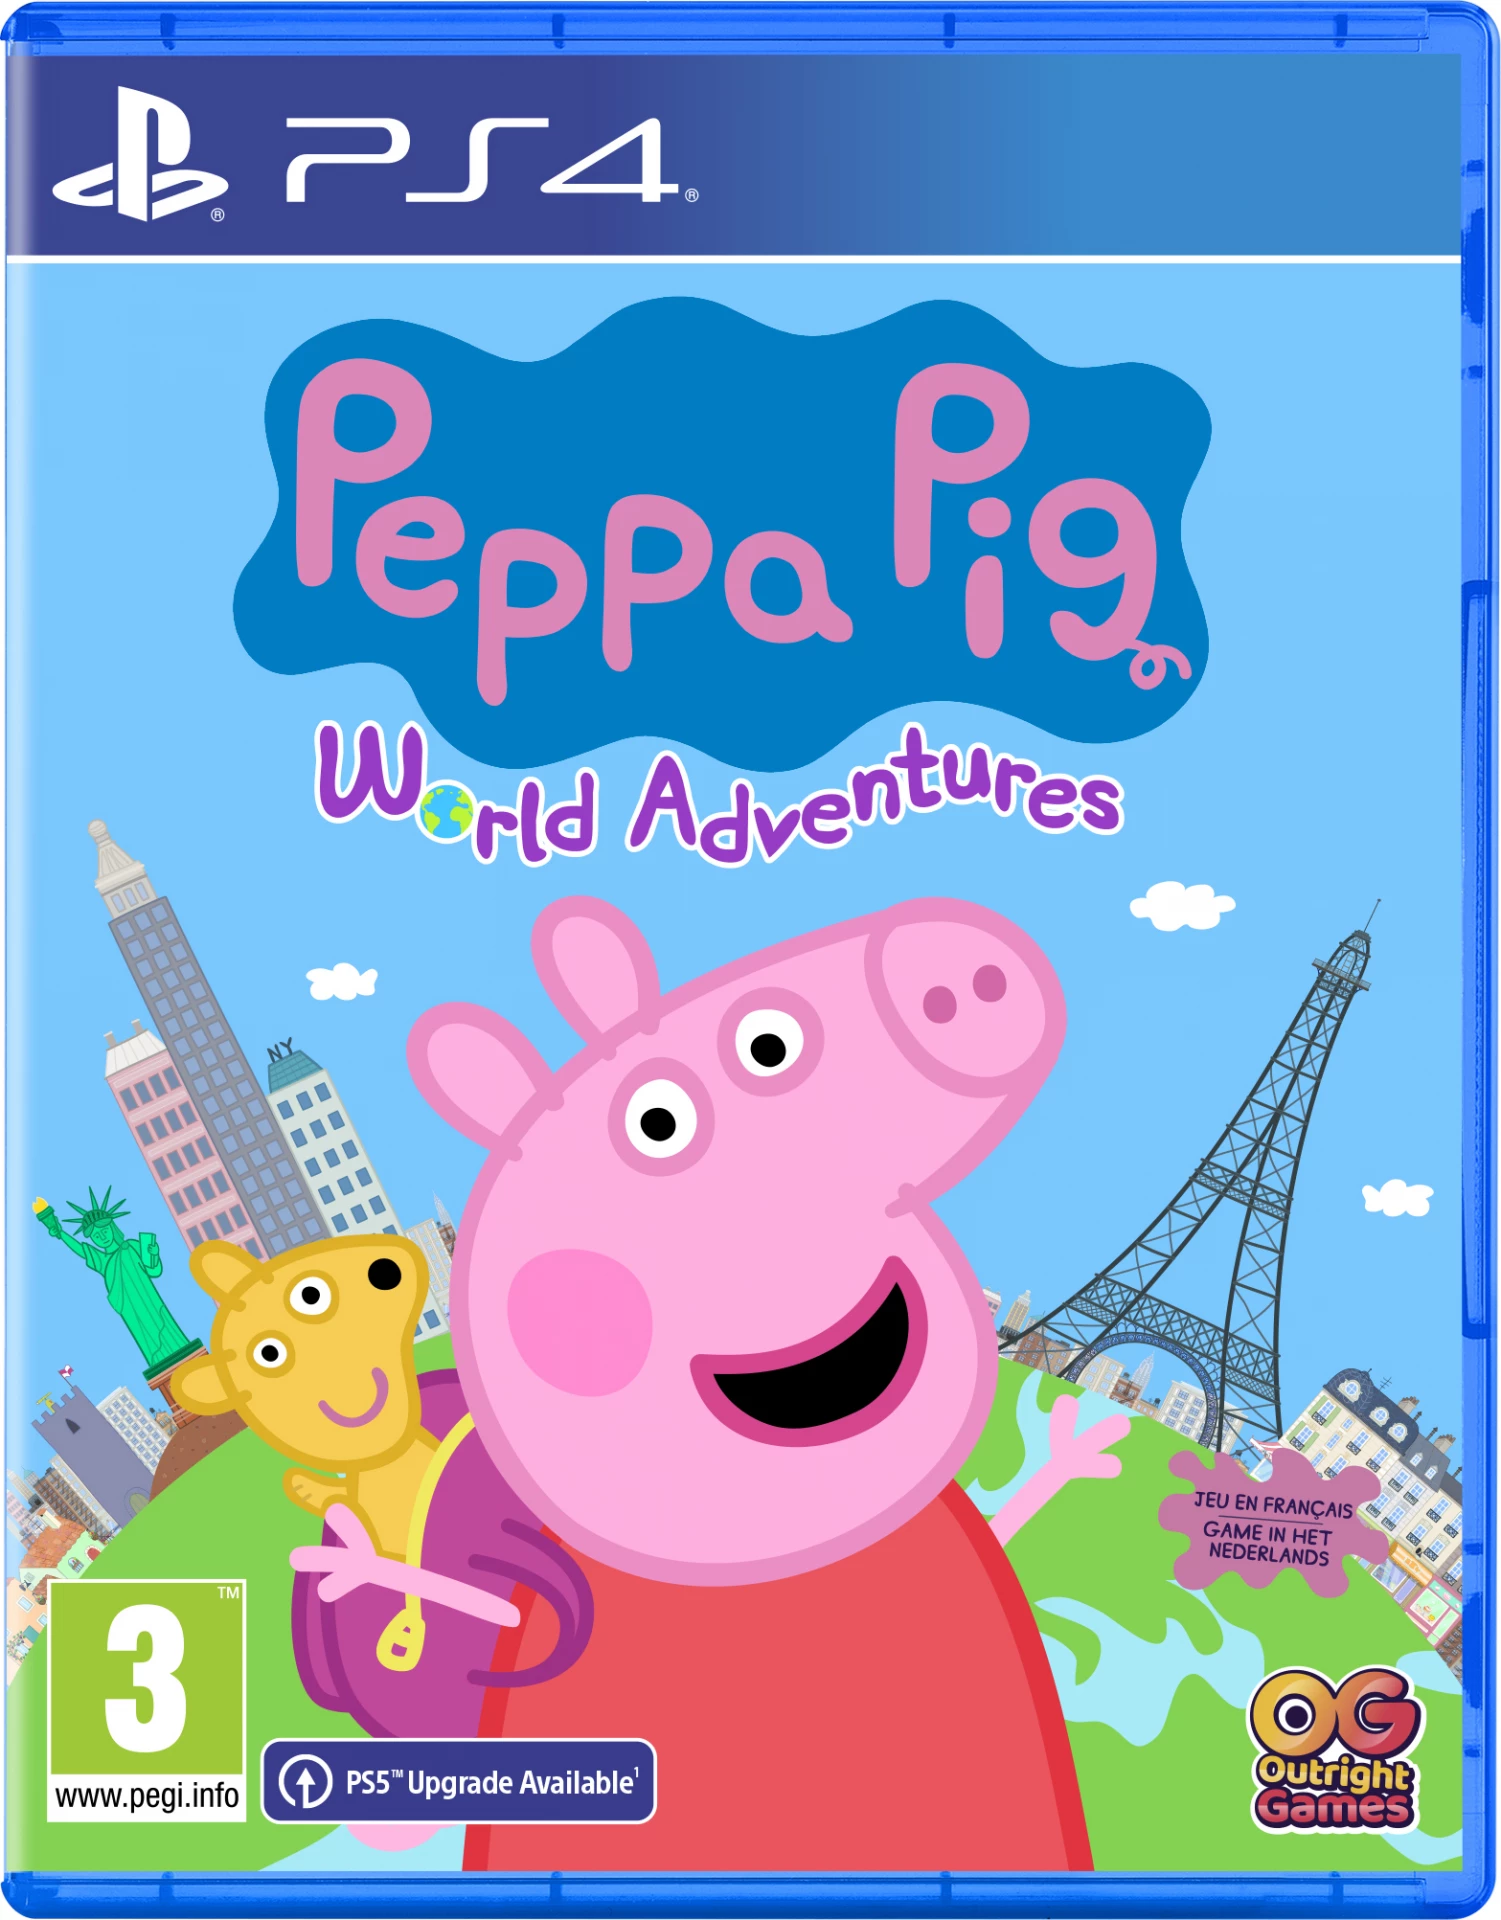 Peppa Pig: World Adventures (PS4), Outright Games